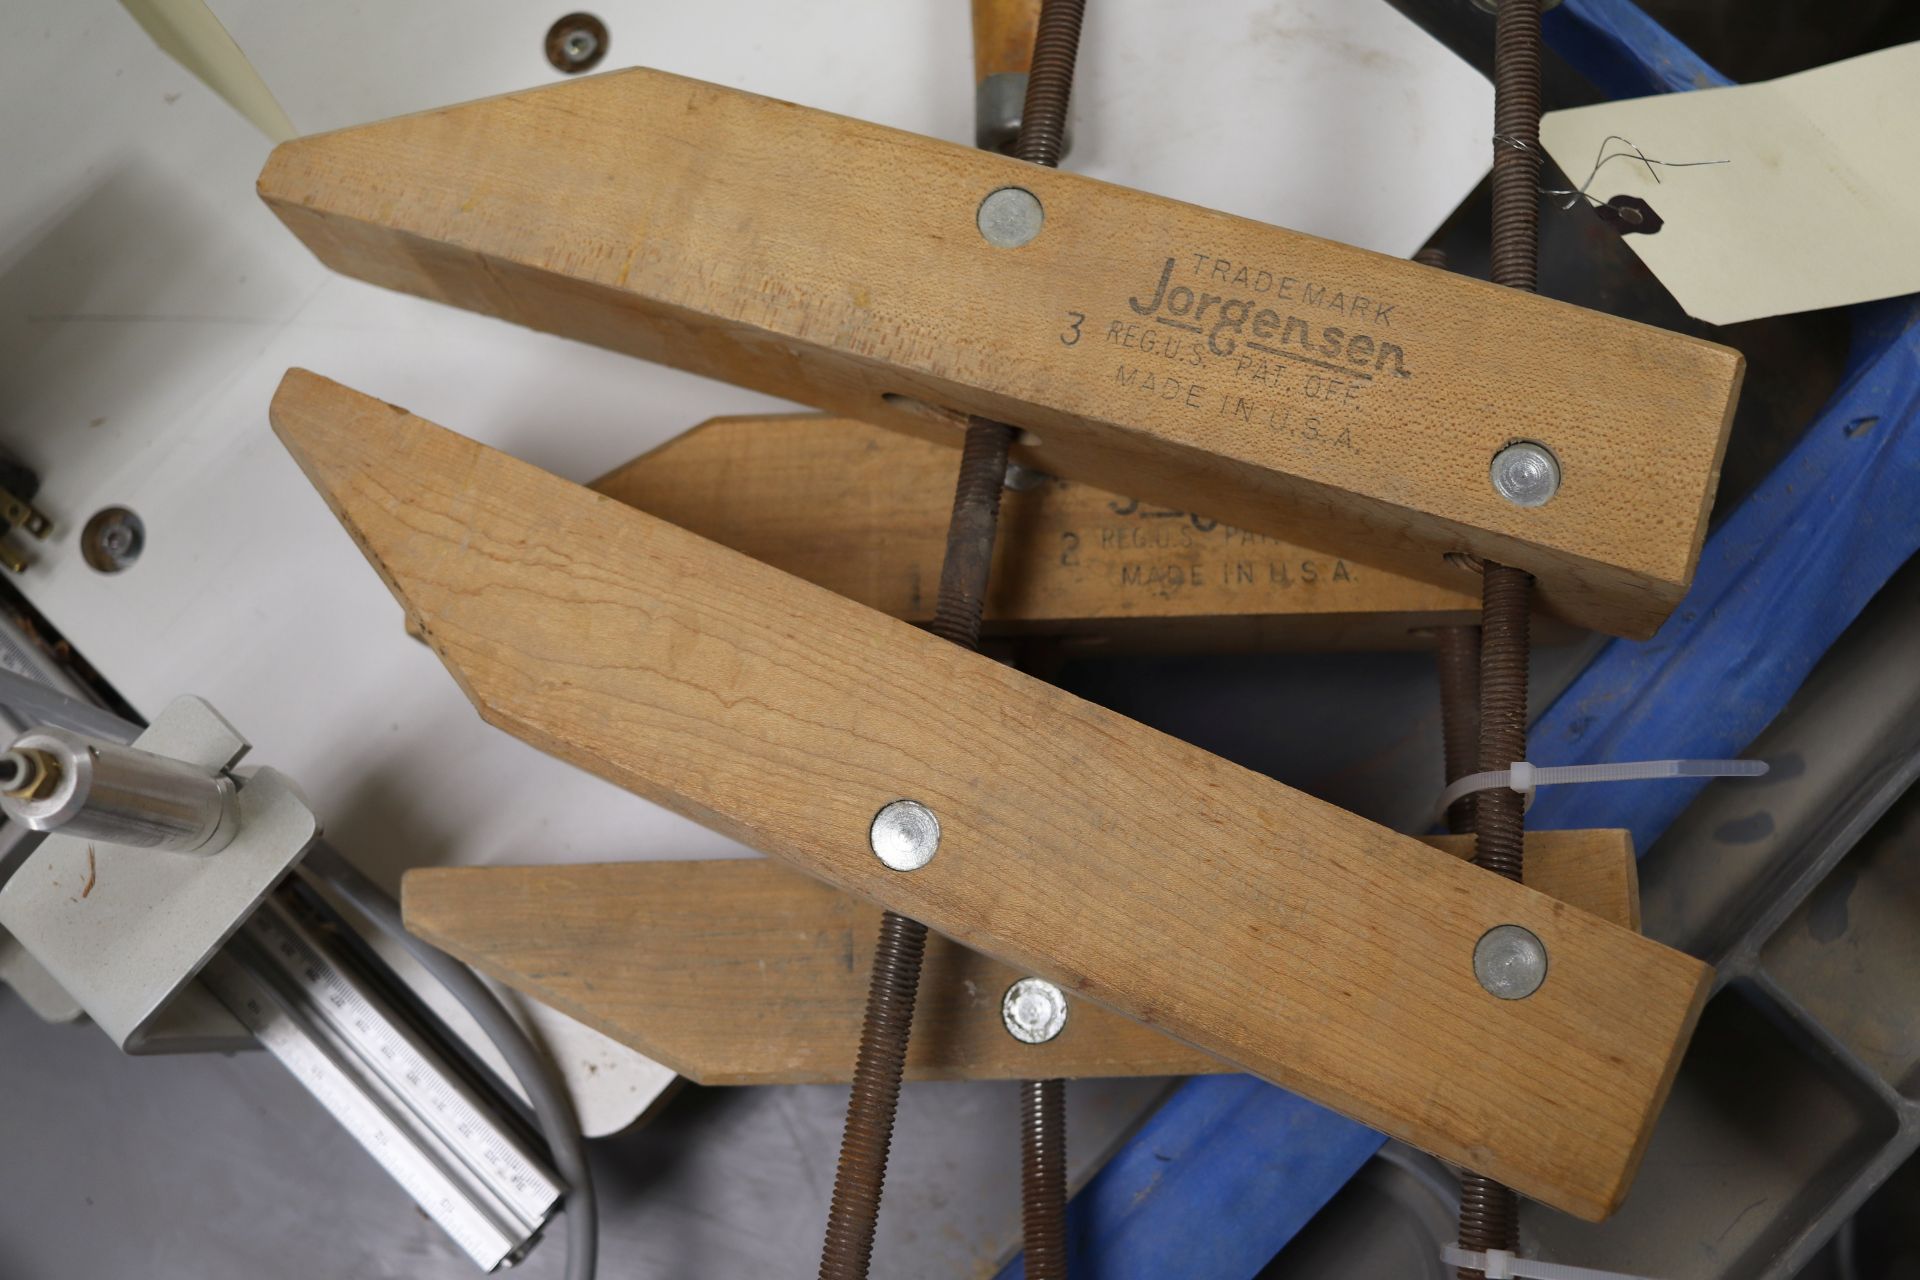 Two Jorgensen #2 and #3 clamps